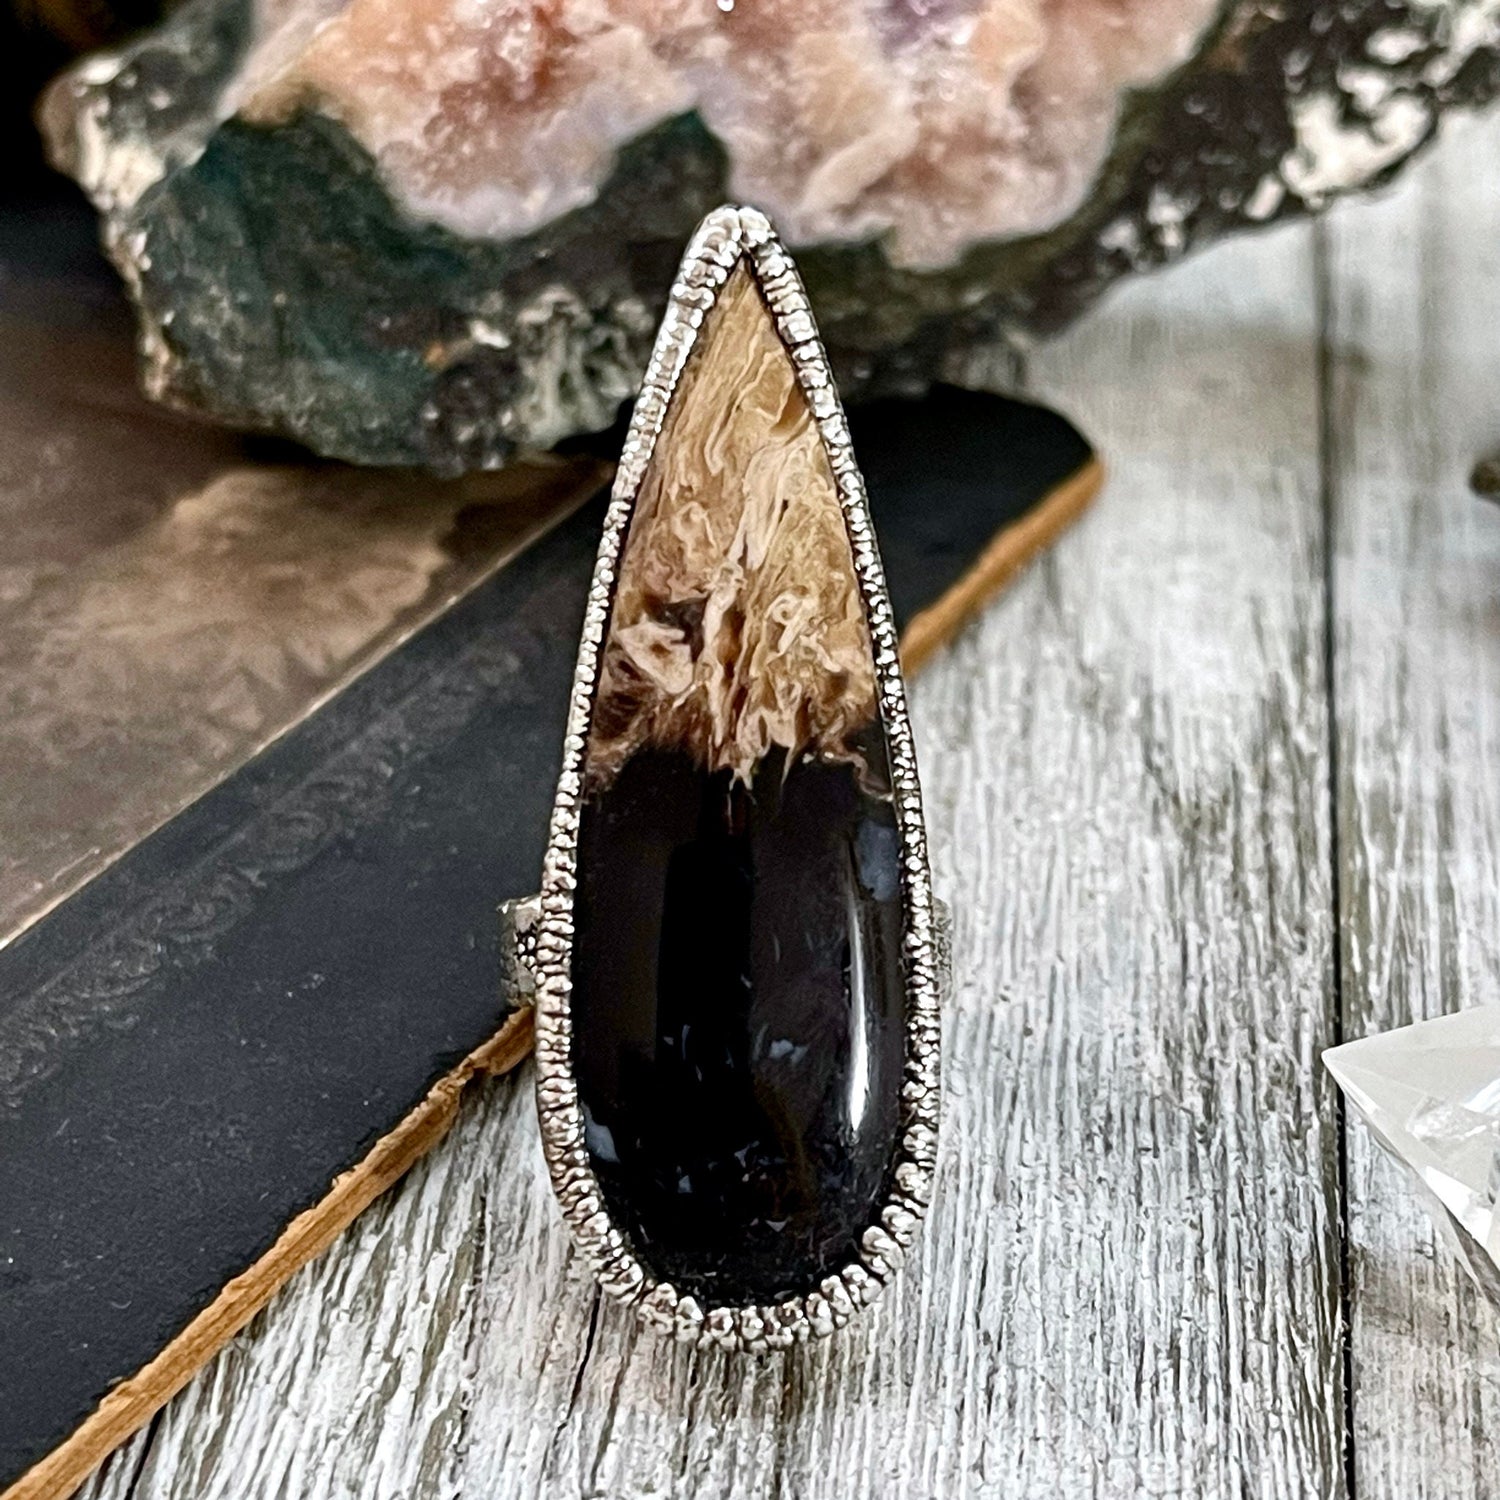 Size 6 Large Fossilized Palm Root Statement Ring in Fine Silver - Black Stone Ring / Foxlark Collection - One of a Kind